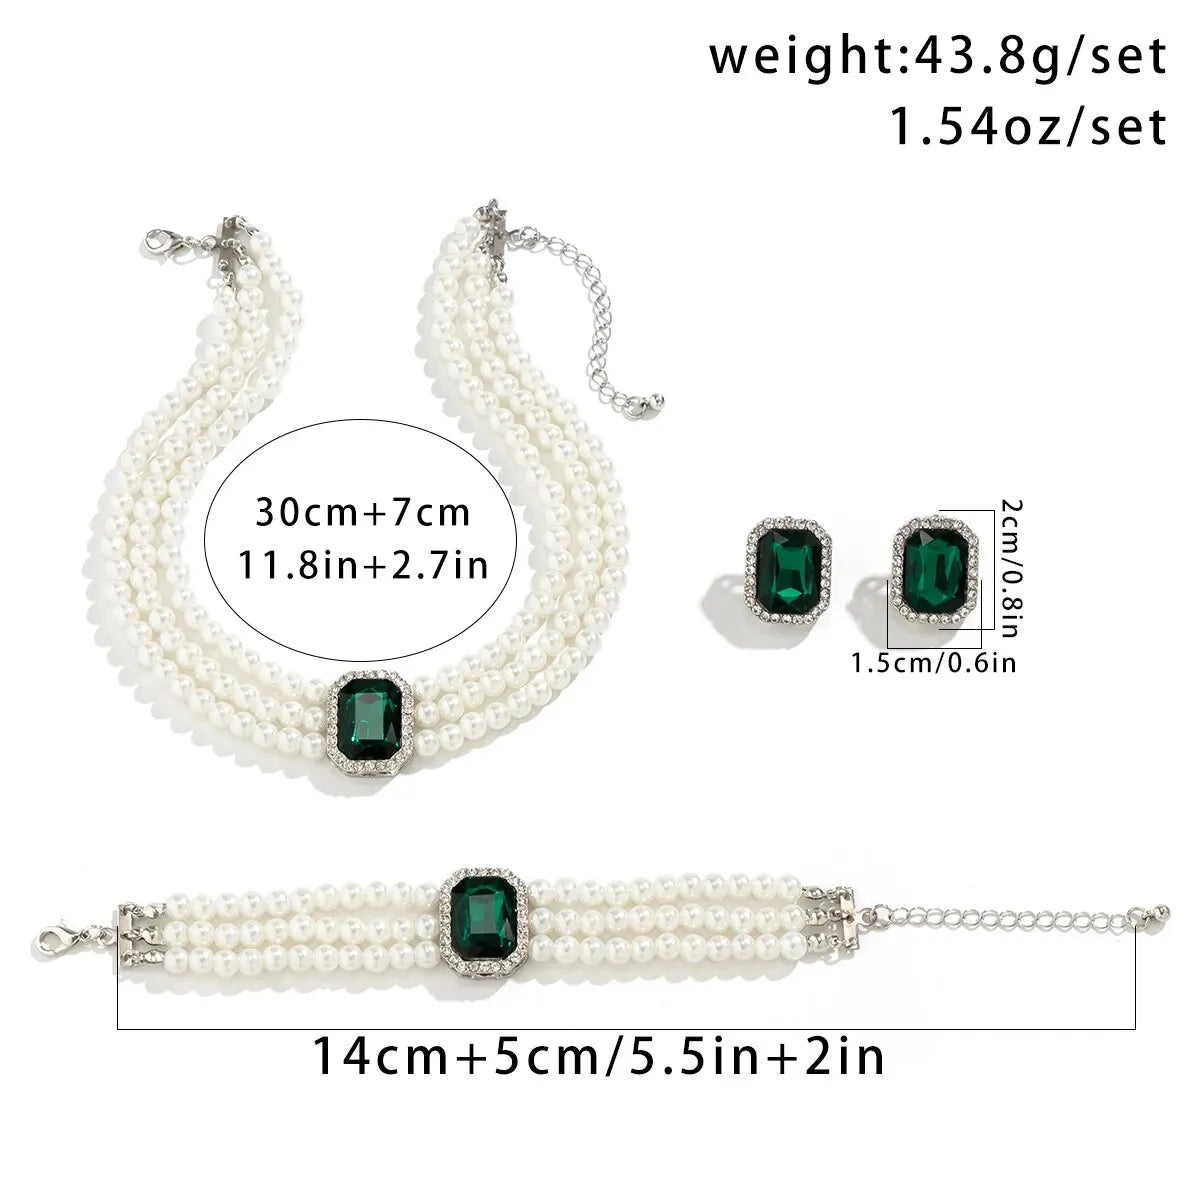 3Pcs Multilayer Imitation Pearl Crystal Chain Necklace Bracelet Women Wedding Bridal Goth Stud Earrings Jewelry Set Accessories